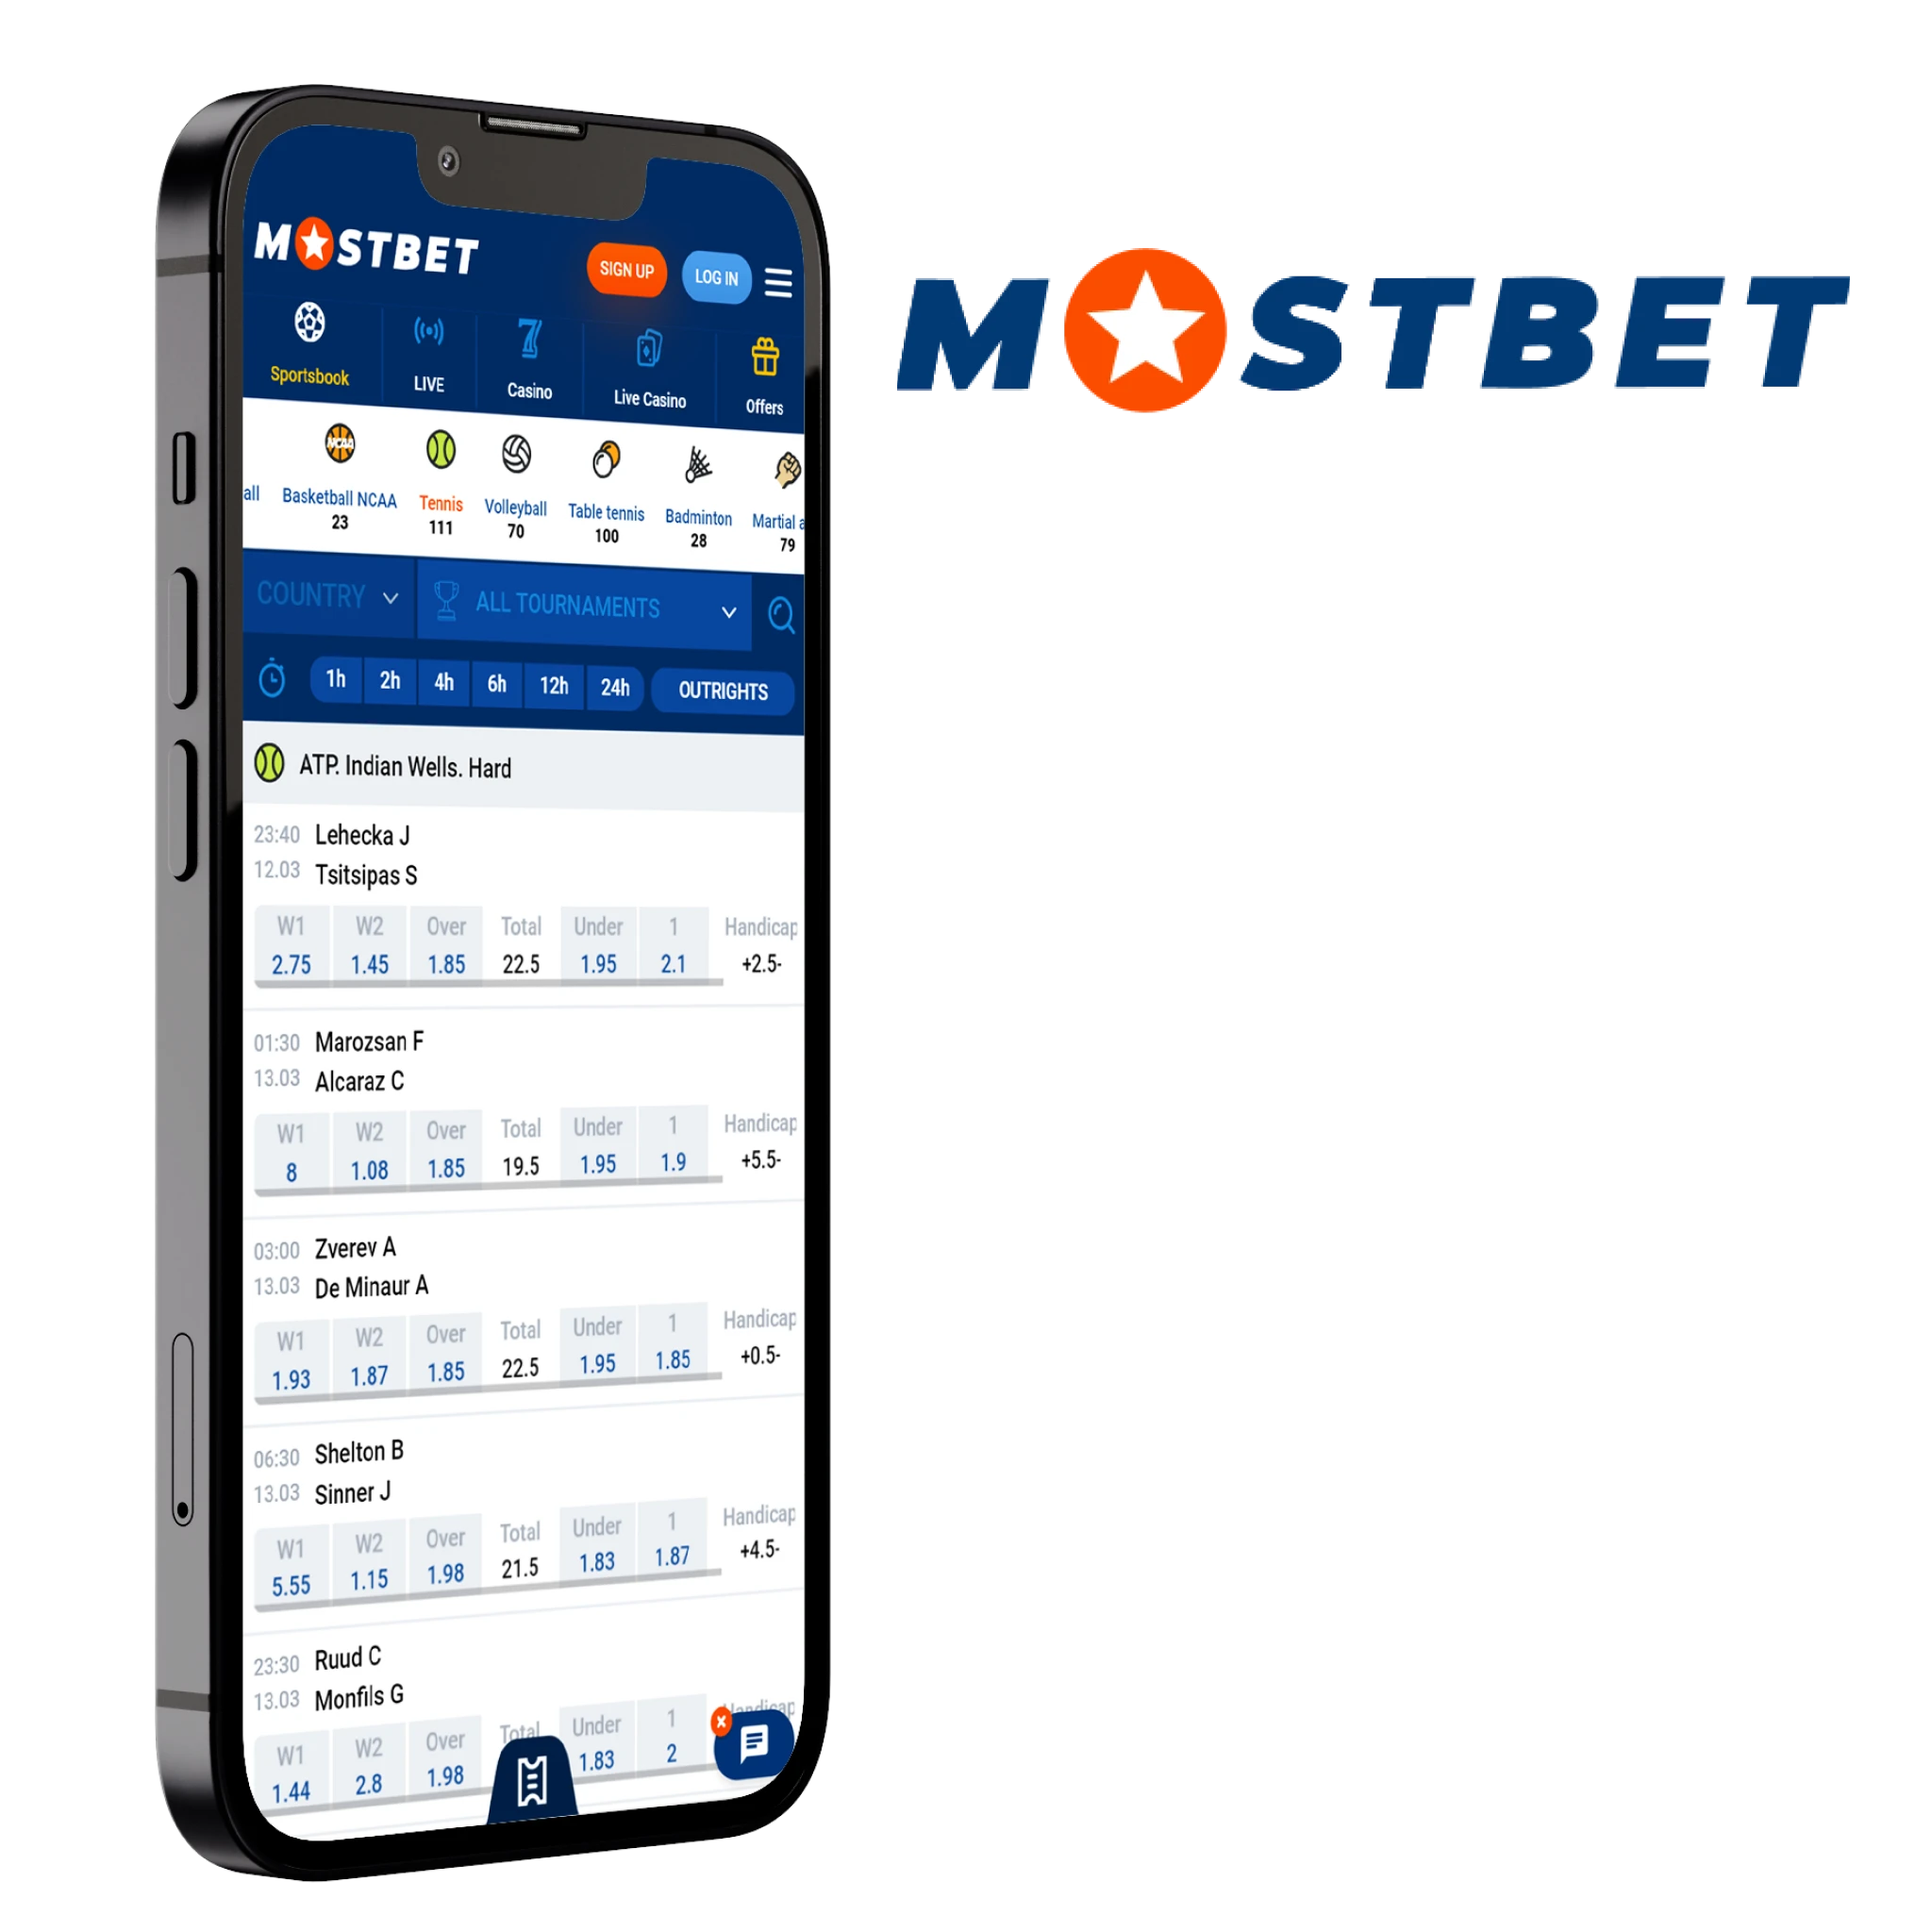 The Mostbet App provides an excellent platform for tennis betting.